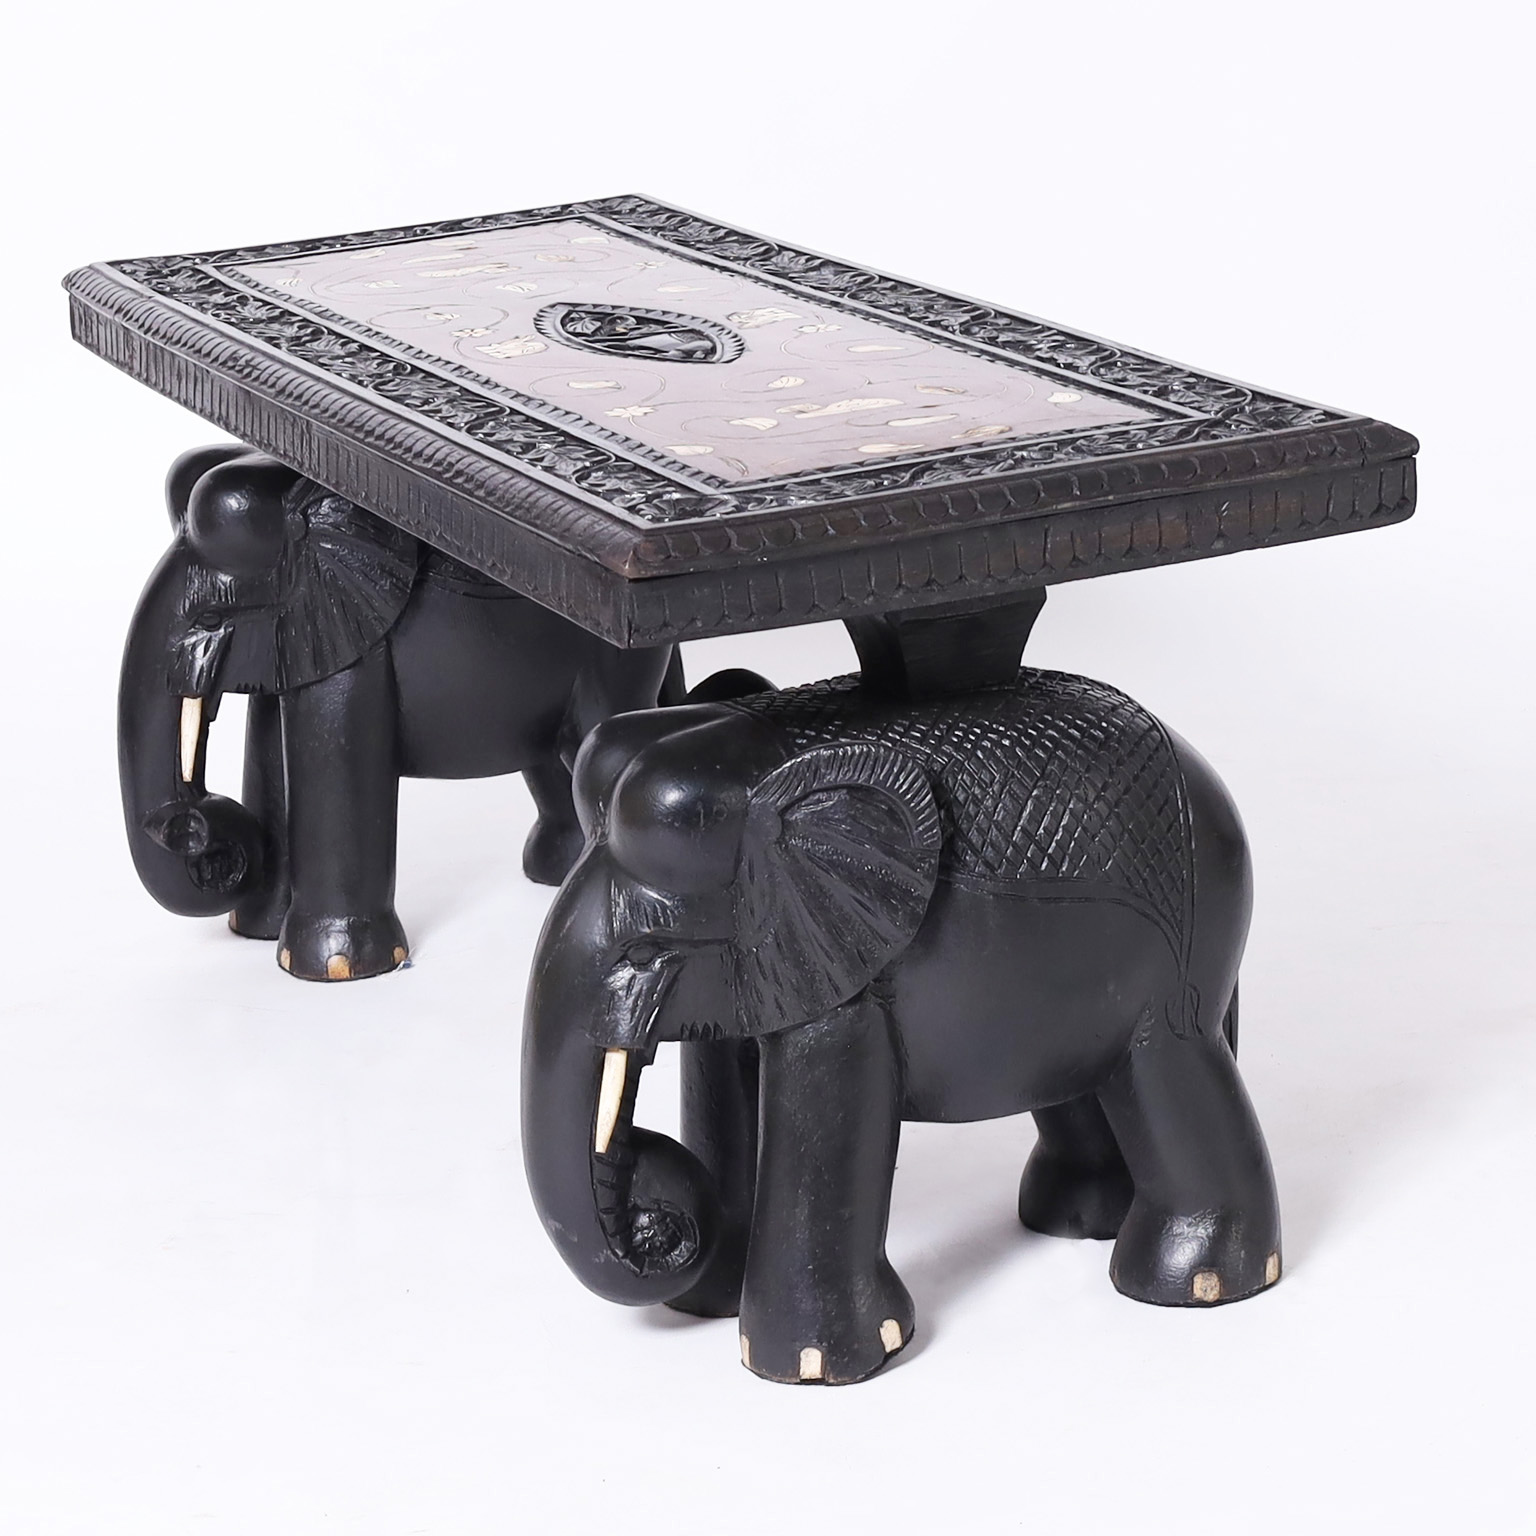 Pair of Antique Anglo Indian Carved Inlaid Tables with Elephants